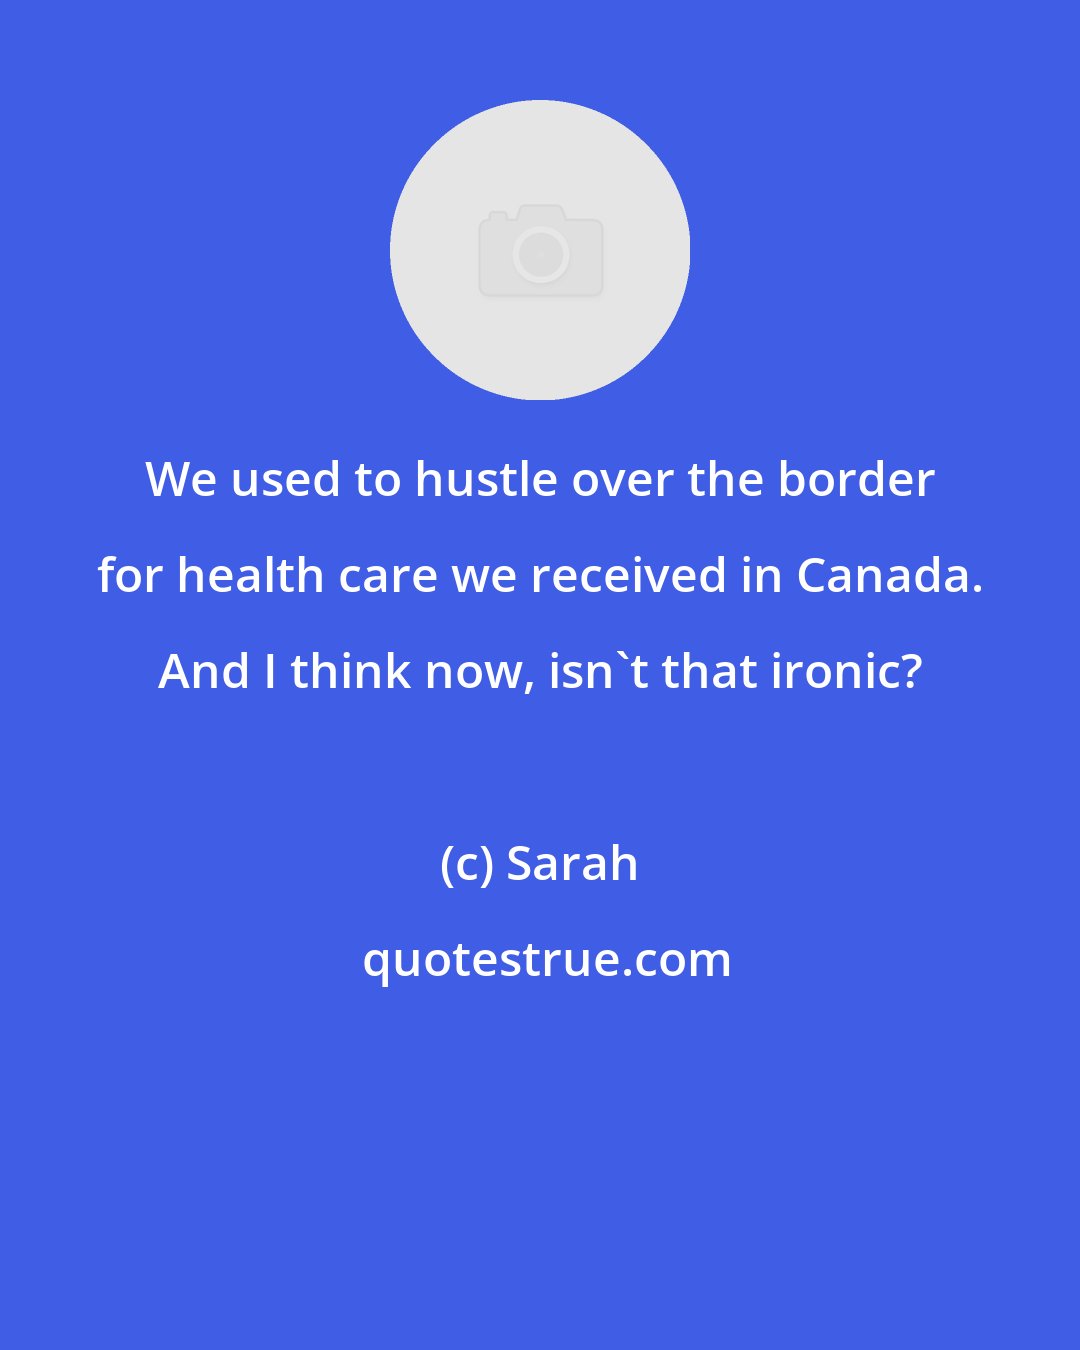 Sarah: We used to hustle over the border for health care we received in Canada. And I think now, isn't that ironic?